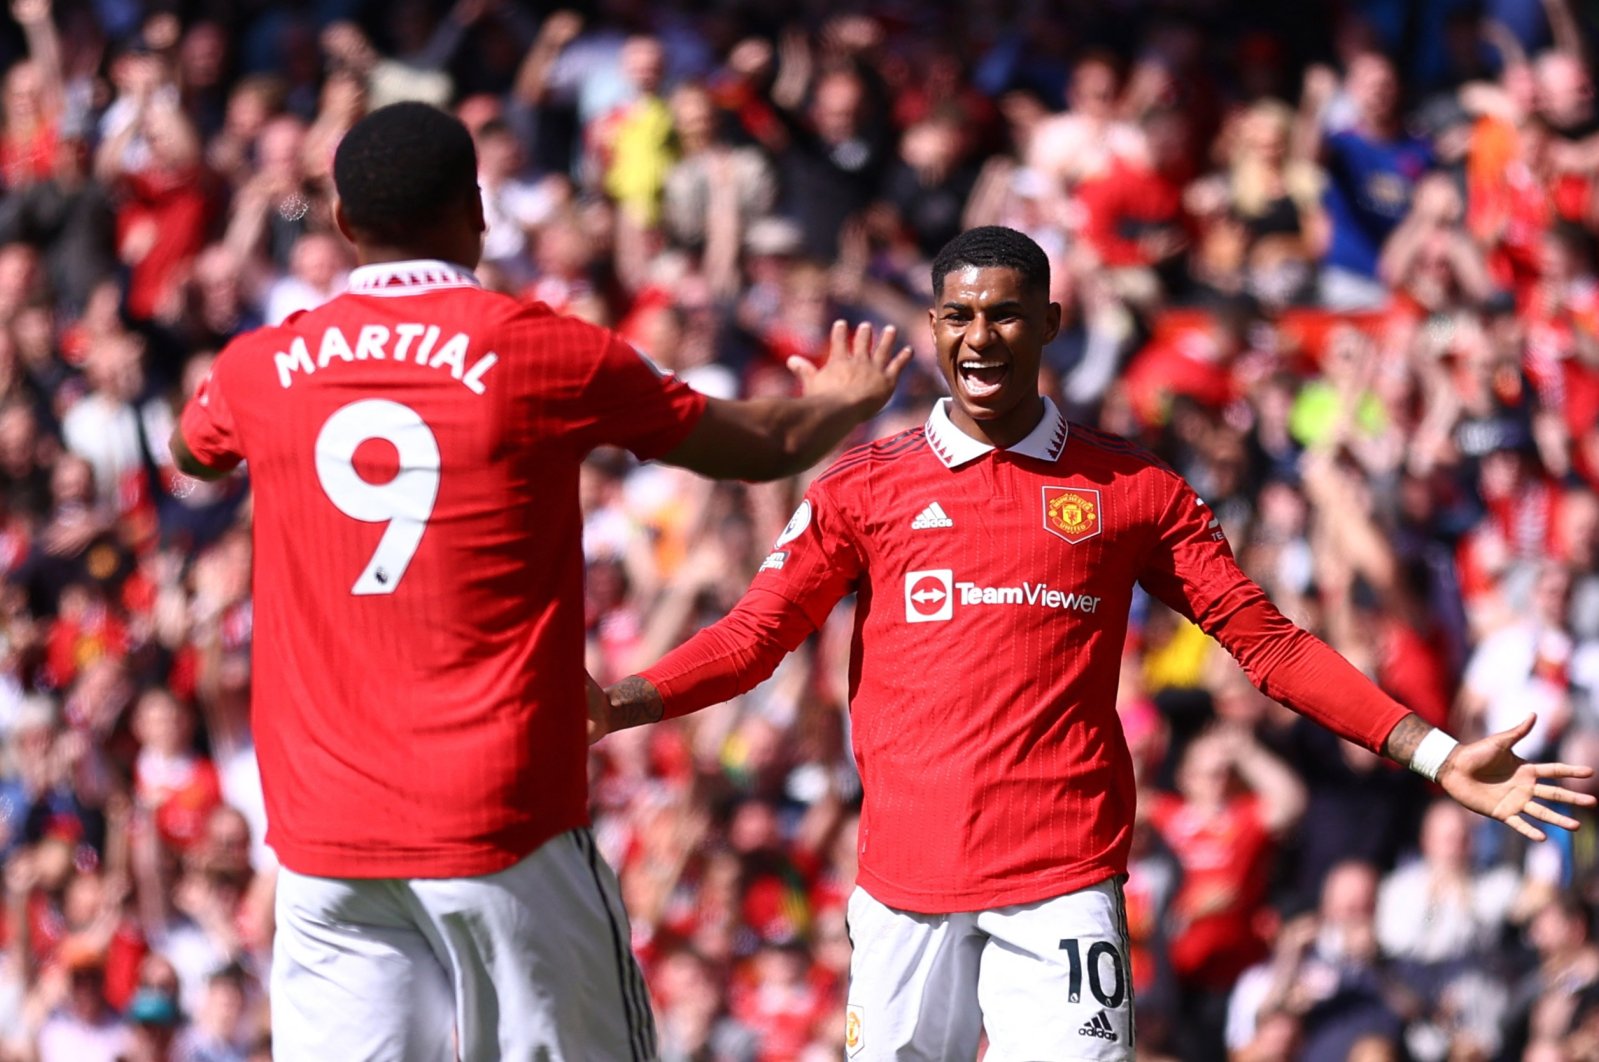 CL dreams: Man United hangs onto 3rd place with 2-0 Everton win